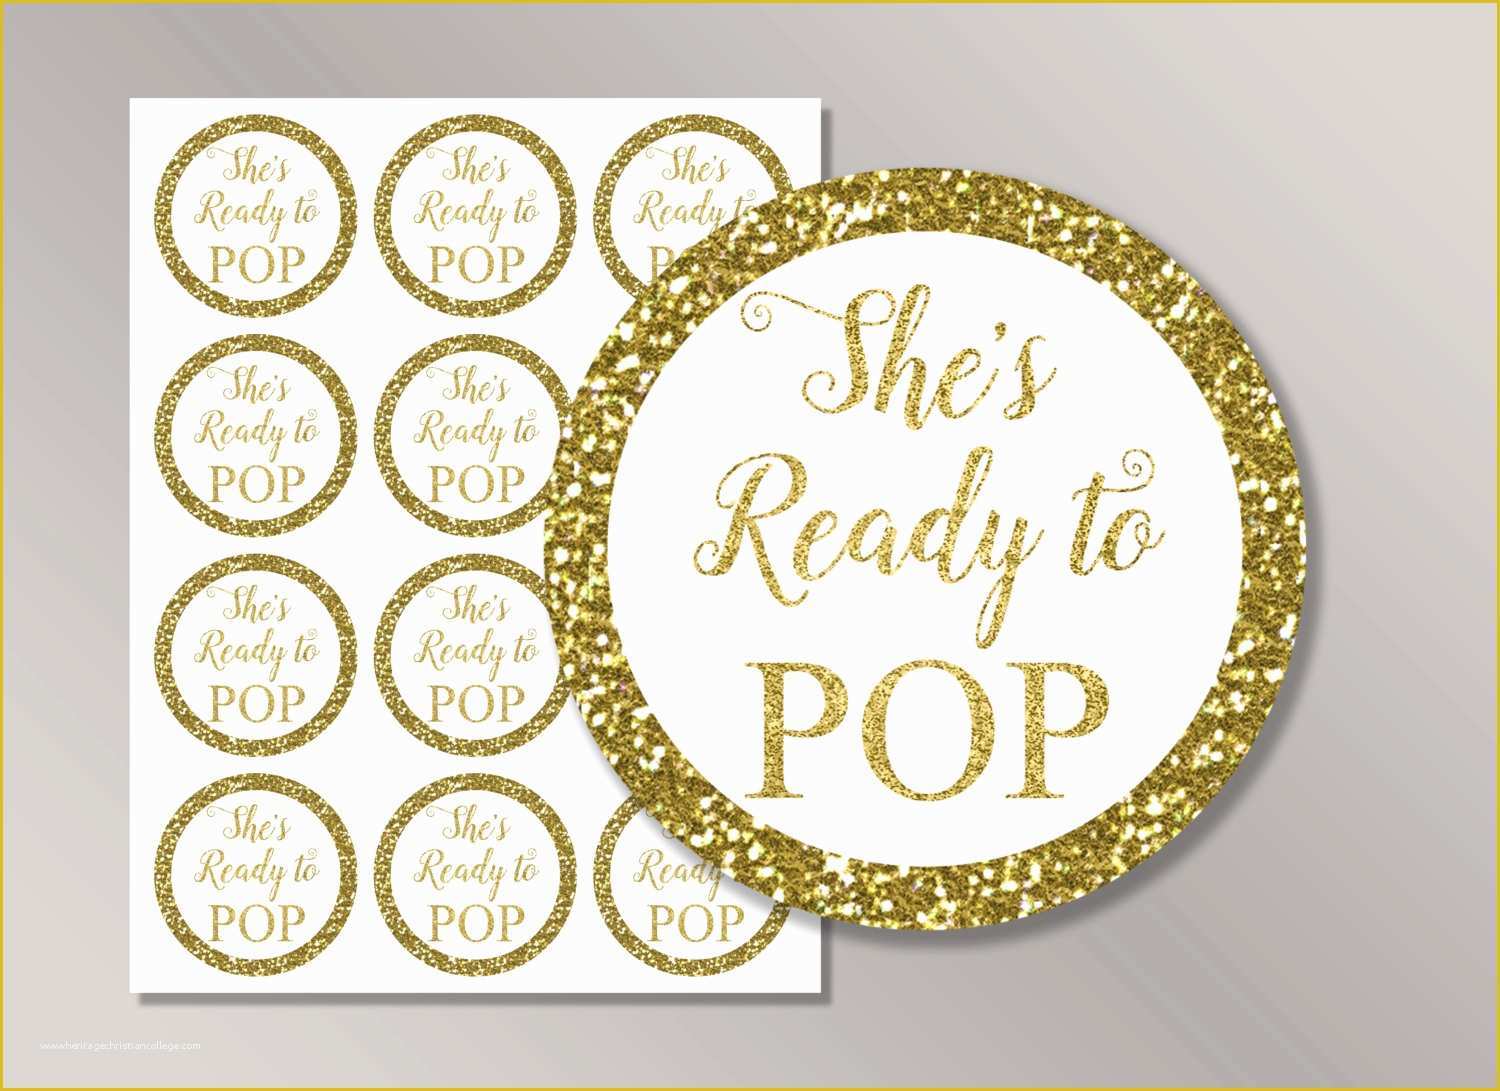 Ready to Pop Labels Template Free Of Shes Ready to Pop Stickers Ready to Pop Tags Ready to Pop